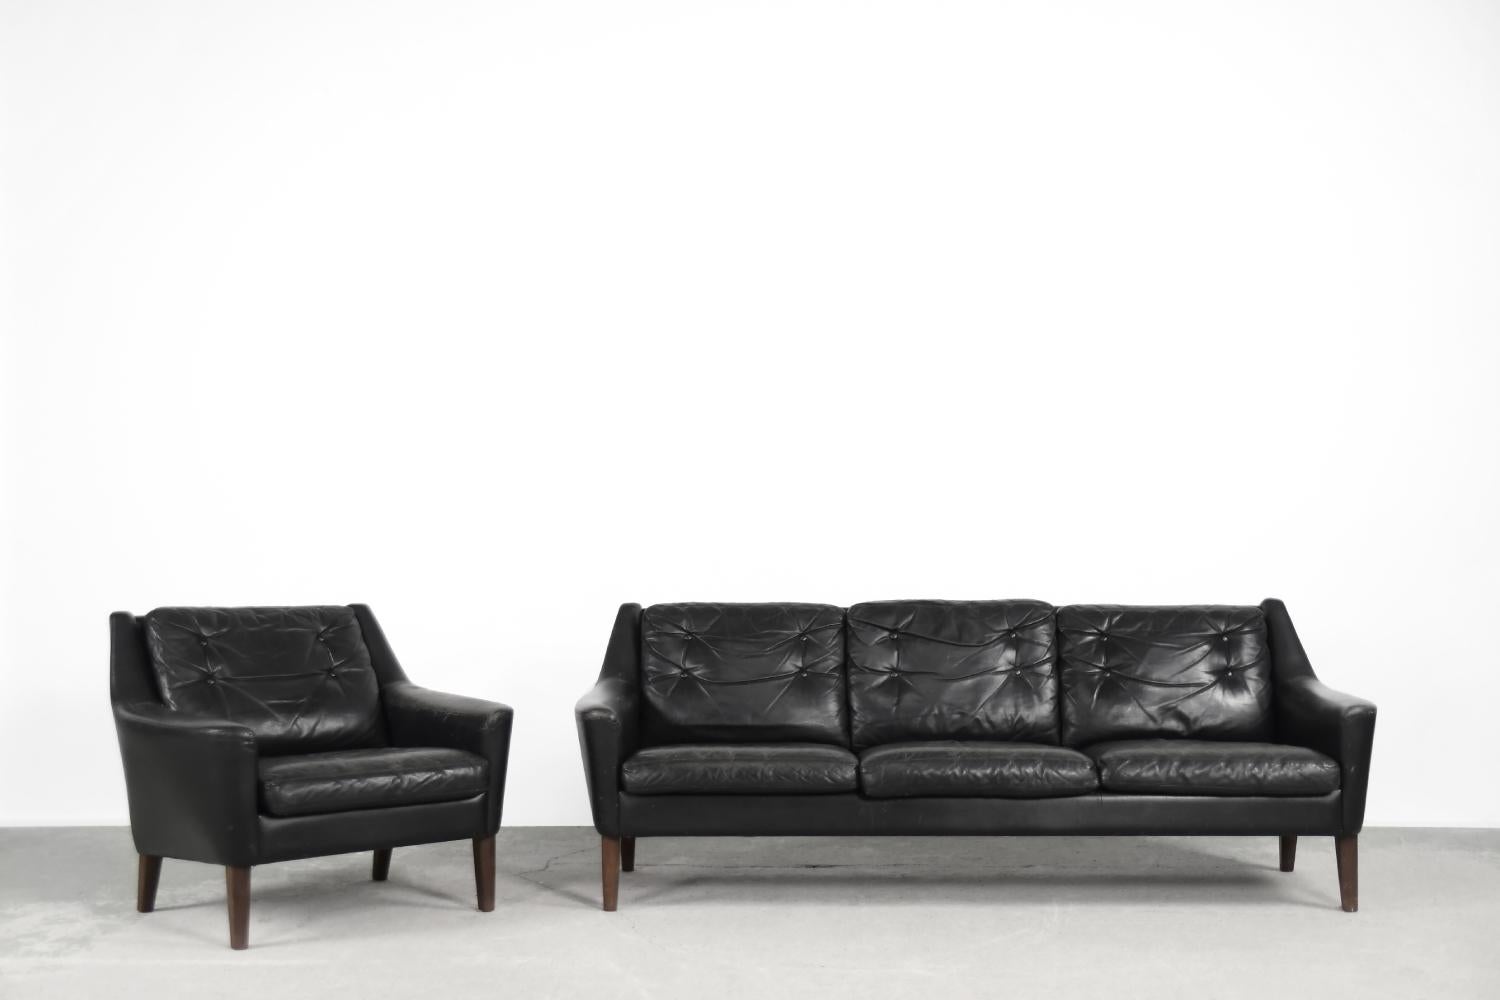 This lounge set consists of a three-seater sofa and an armchair, was manufactured by the Swedish Ulferts Tibro during the 1960s. This set is finished in black natural leather and has loosely placed cushions. The frame is characteristically up and